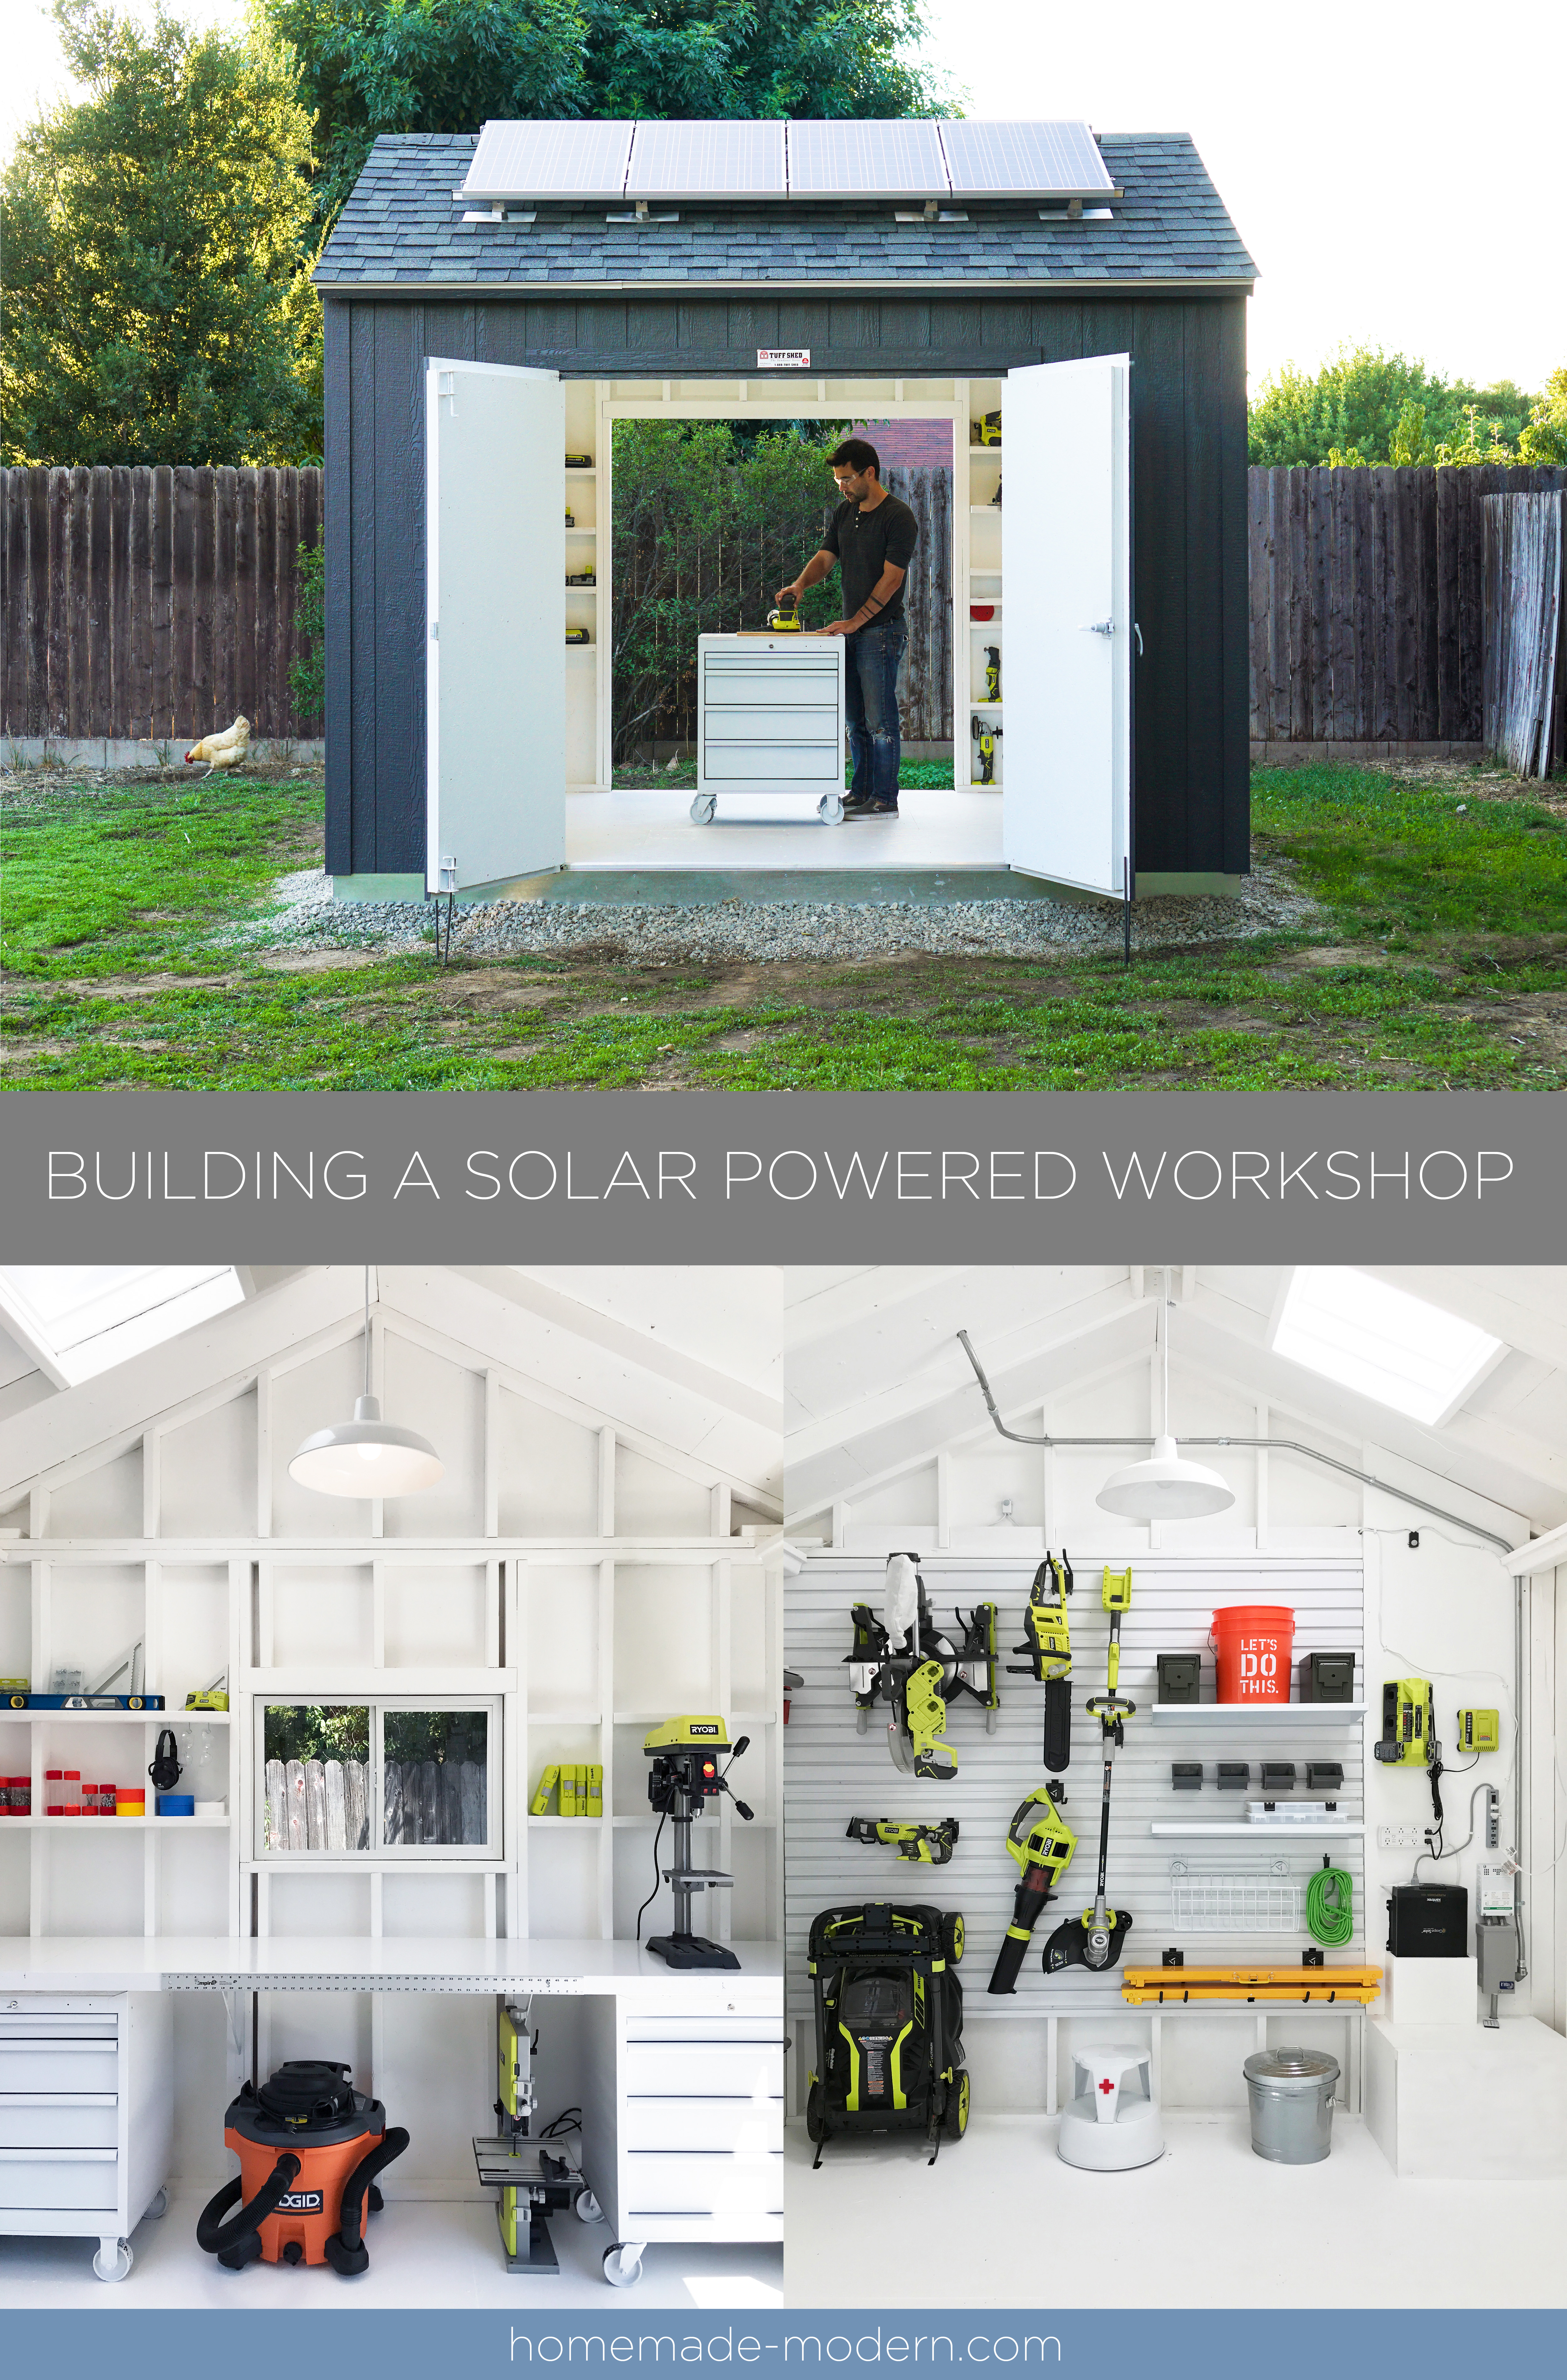 This off-the-grid solar powered workshop was made by retrofitting a prefabricated shed from TuffShed with a 400watt solar kit also from Home Depot. For more information go to HomeMade-Modern.com